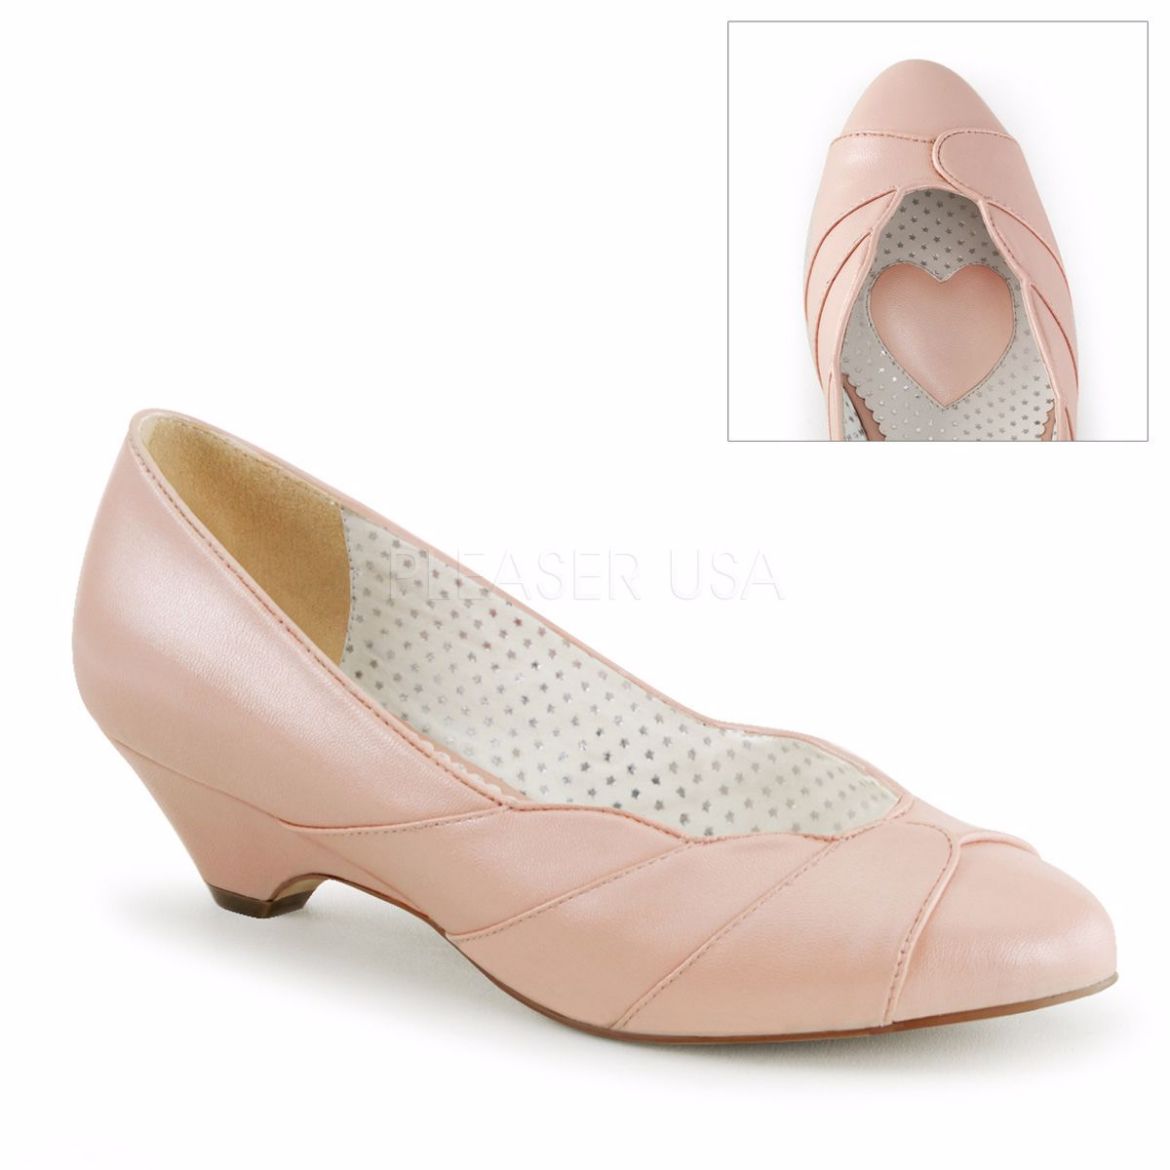 Product image of Pin Up Couture Lulu-05 Baby Pink Faux Leather, 1 1/2 inch (3.8 cm) Kitten Wedge Court Pump Shoes